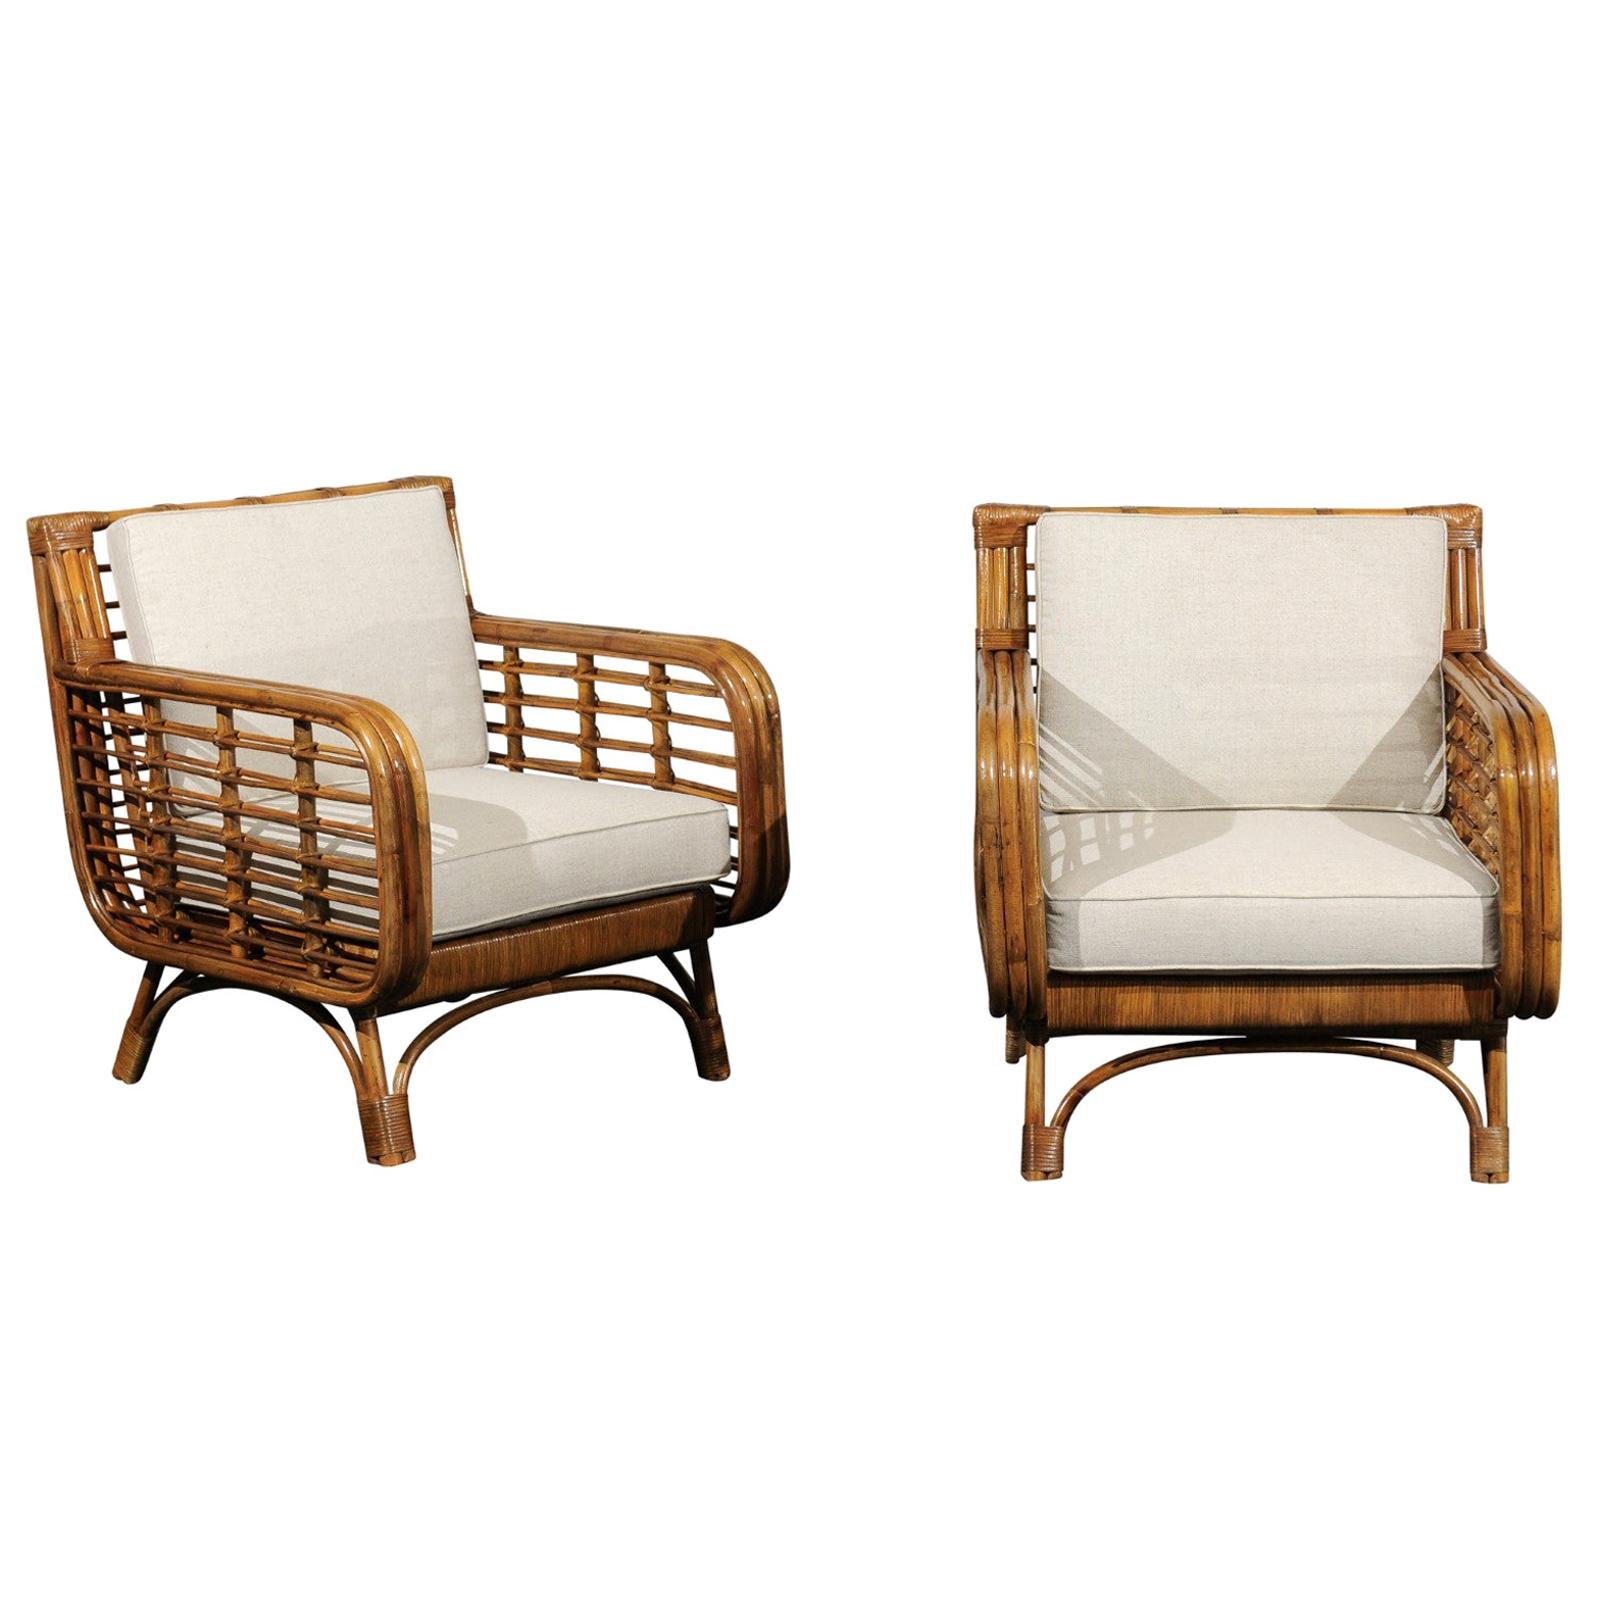 Beautiful Restored Pair of Birdcage Style Rattan Loungers, circa 1955